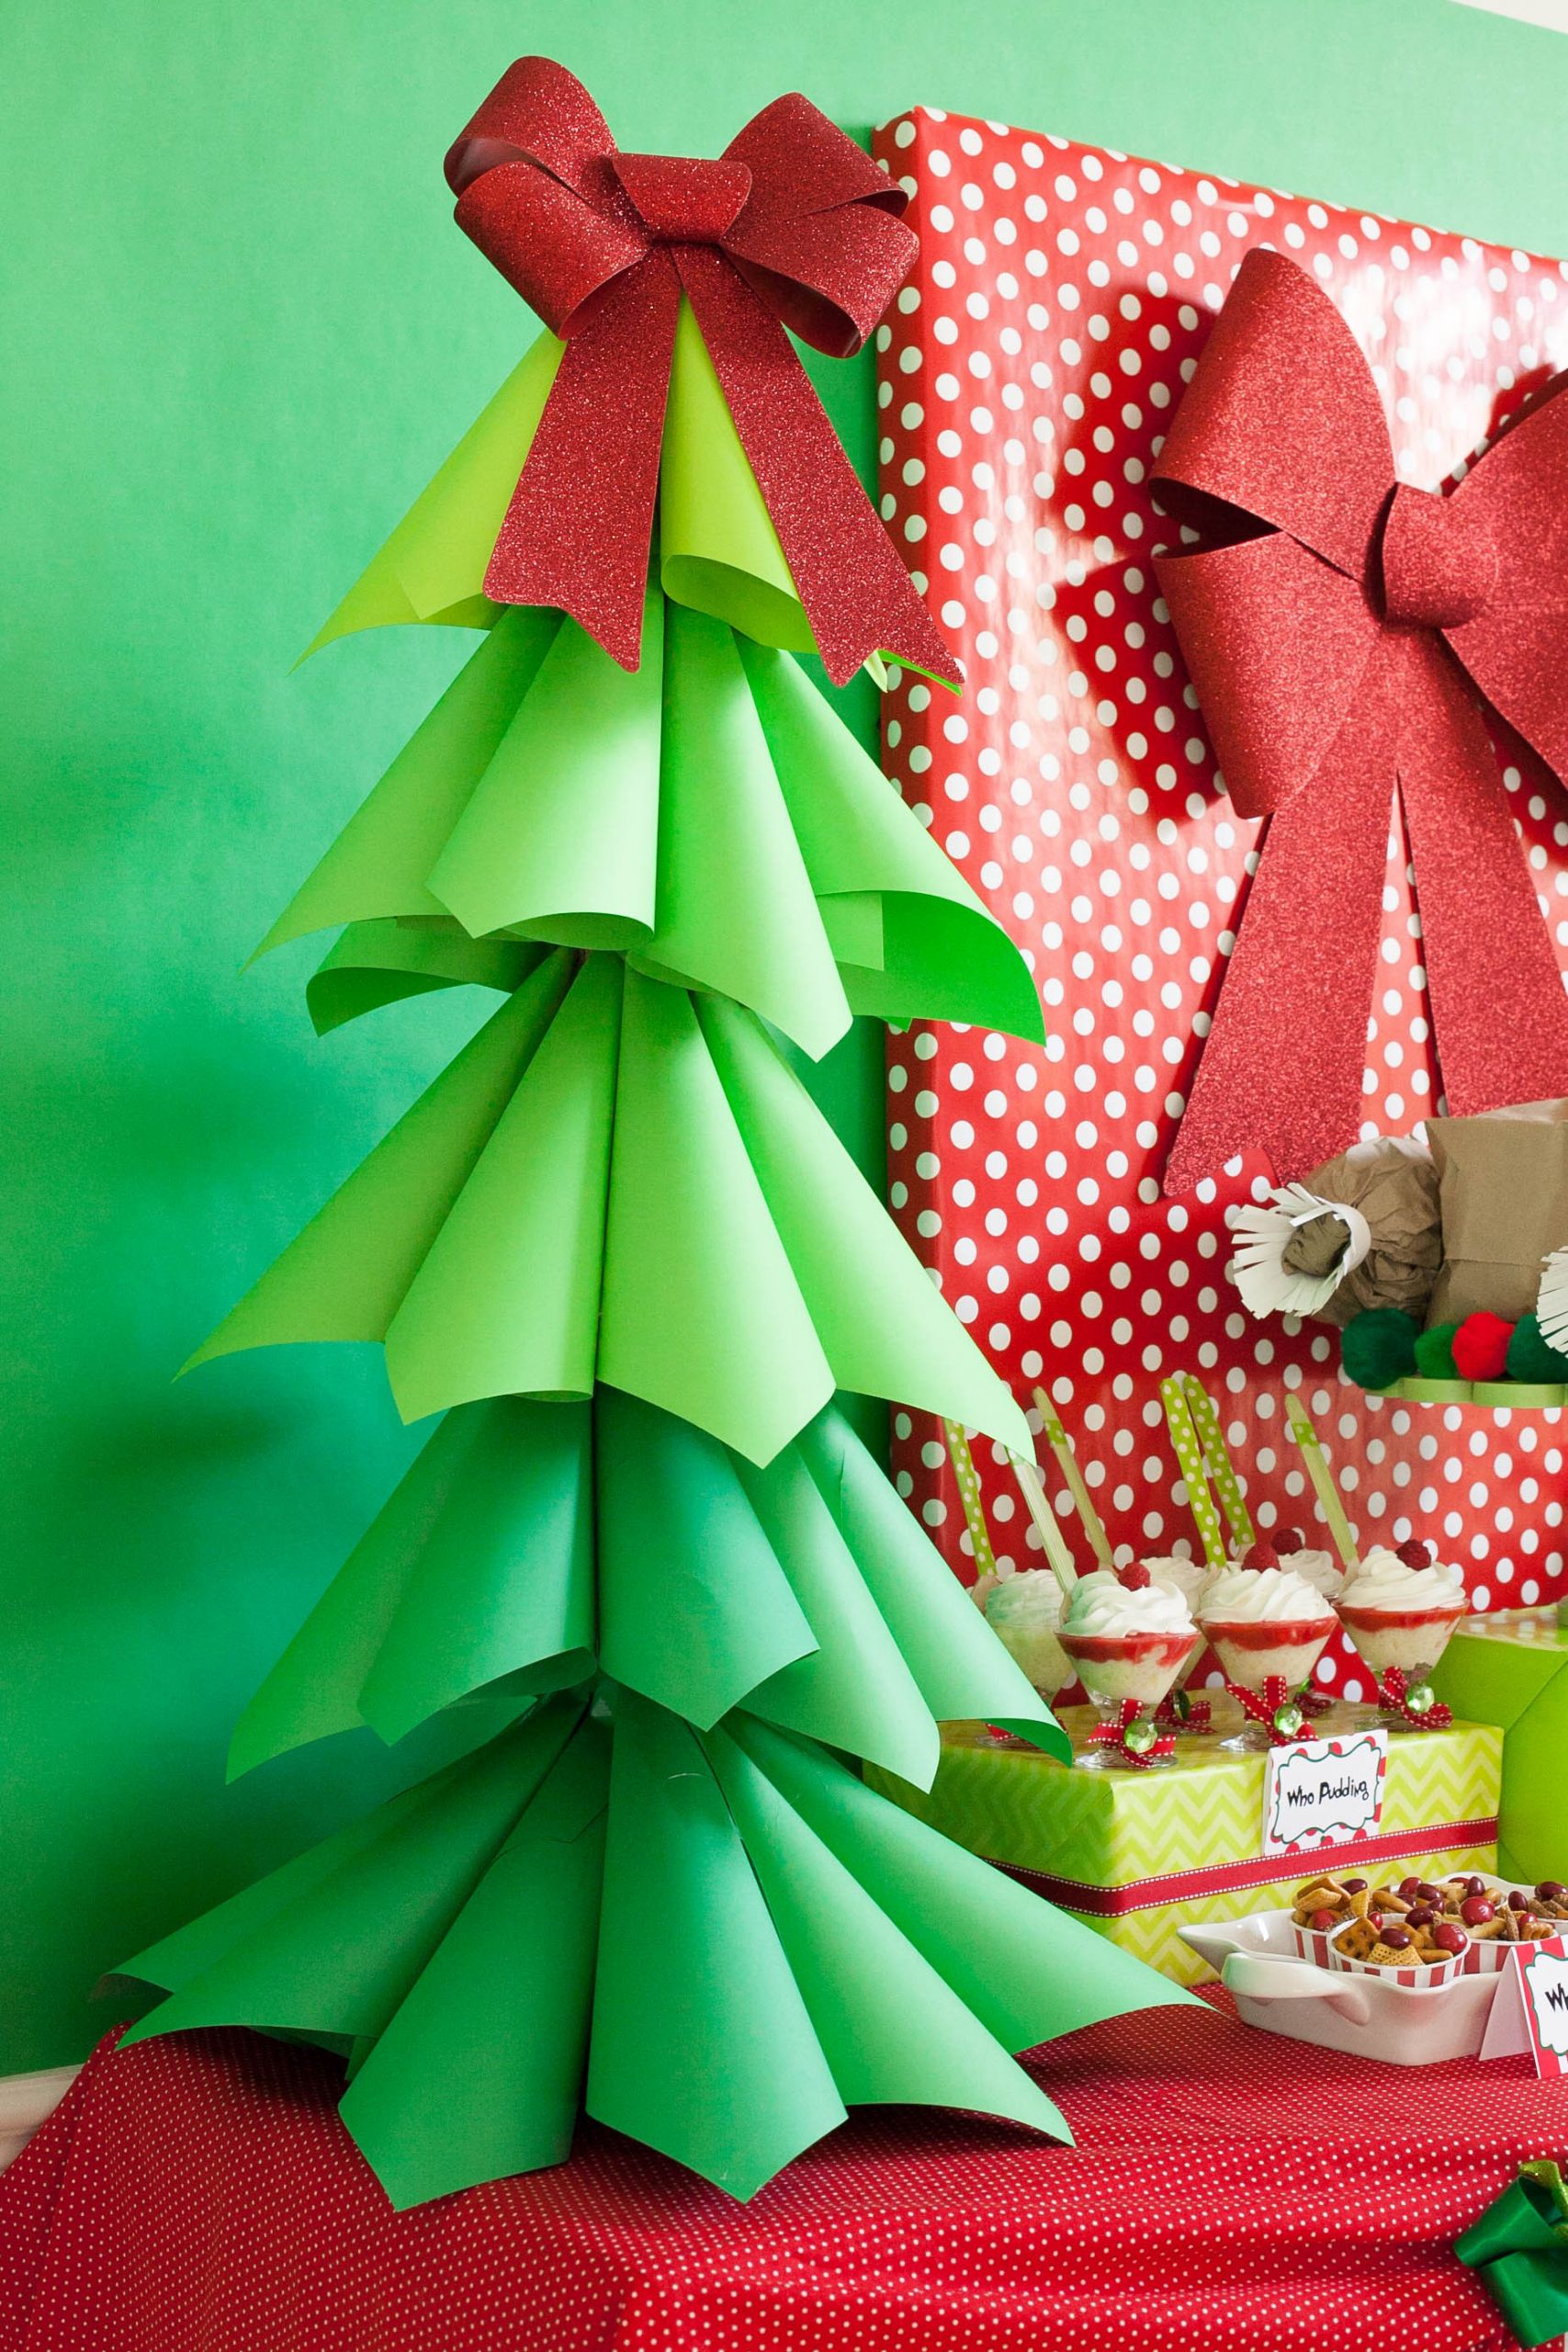 DIY Cardboard Christmas Tree
 Giant Ombre Paper Cone Christmas Trees a DIY Tutorial